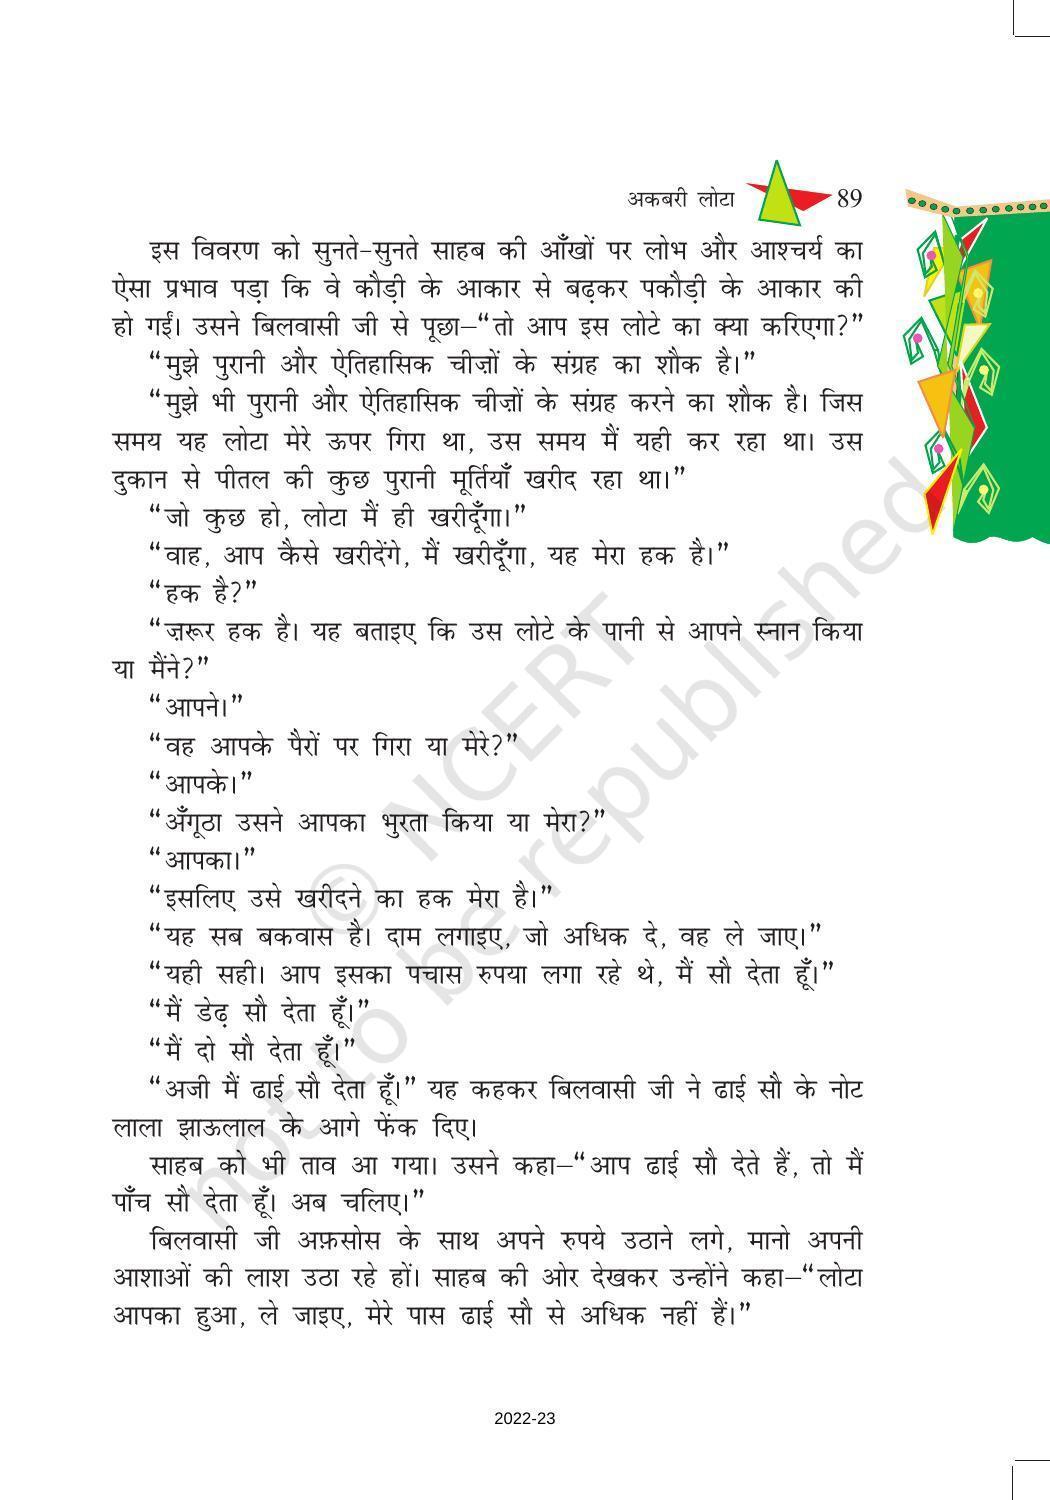 NCERT Book for Class 8 Hindi Vasant Chapter 14 अकबरी लोटा - Page 7